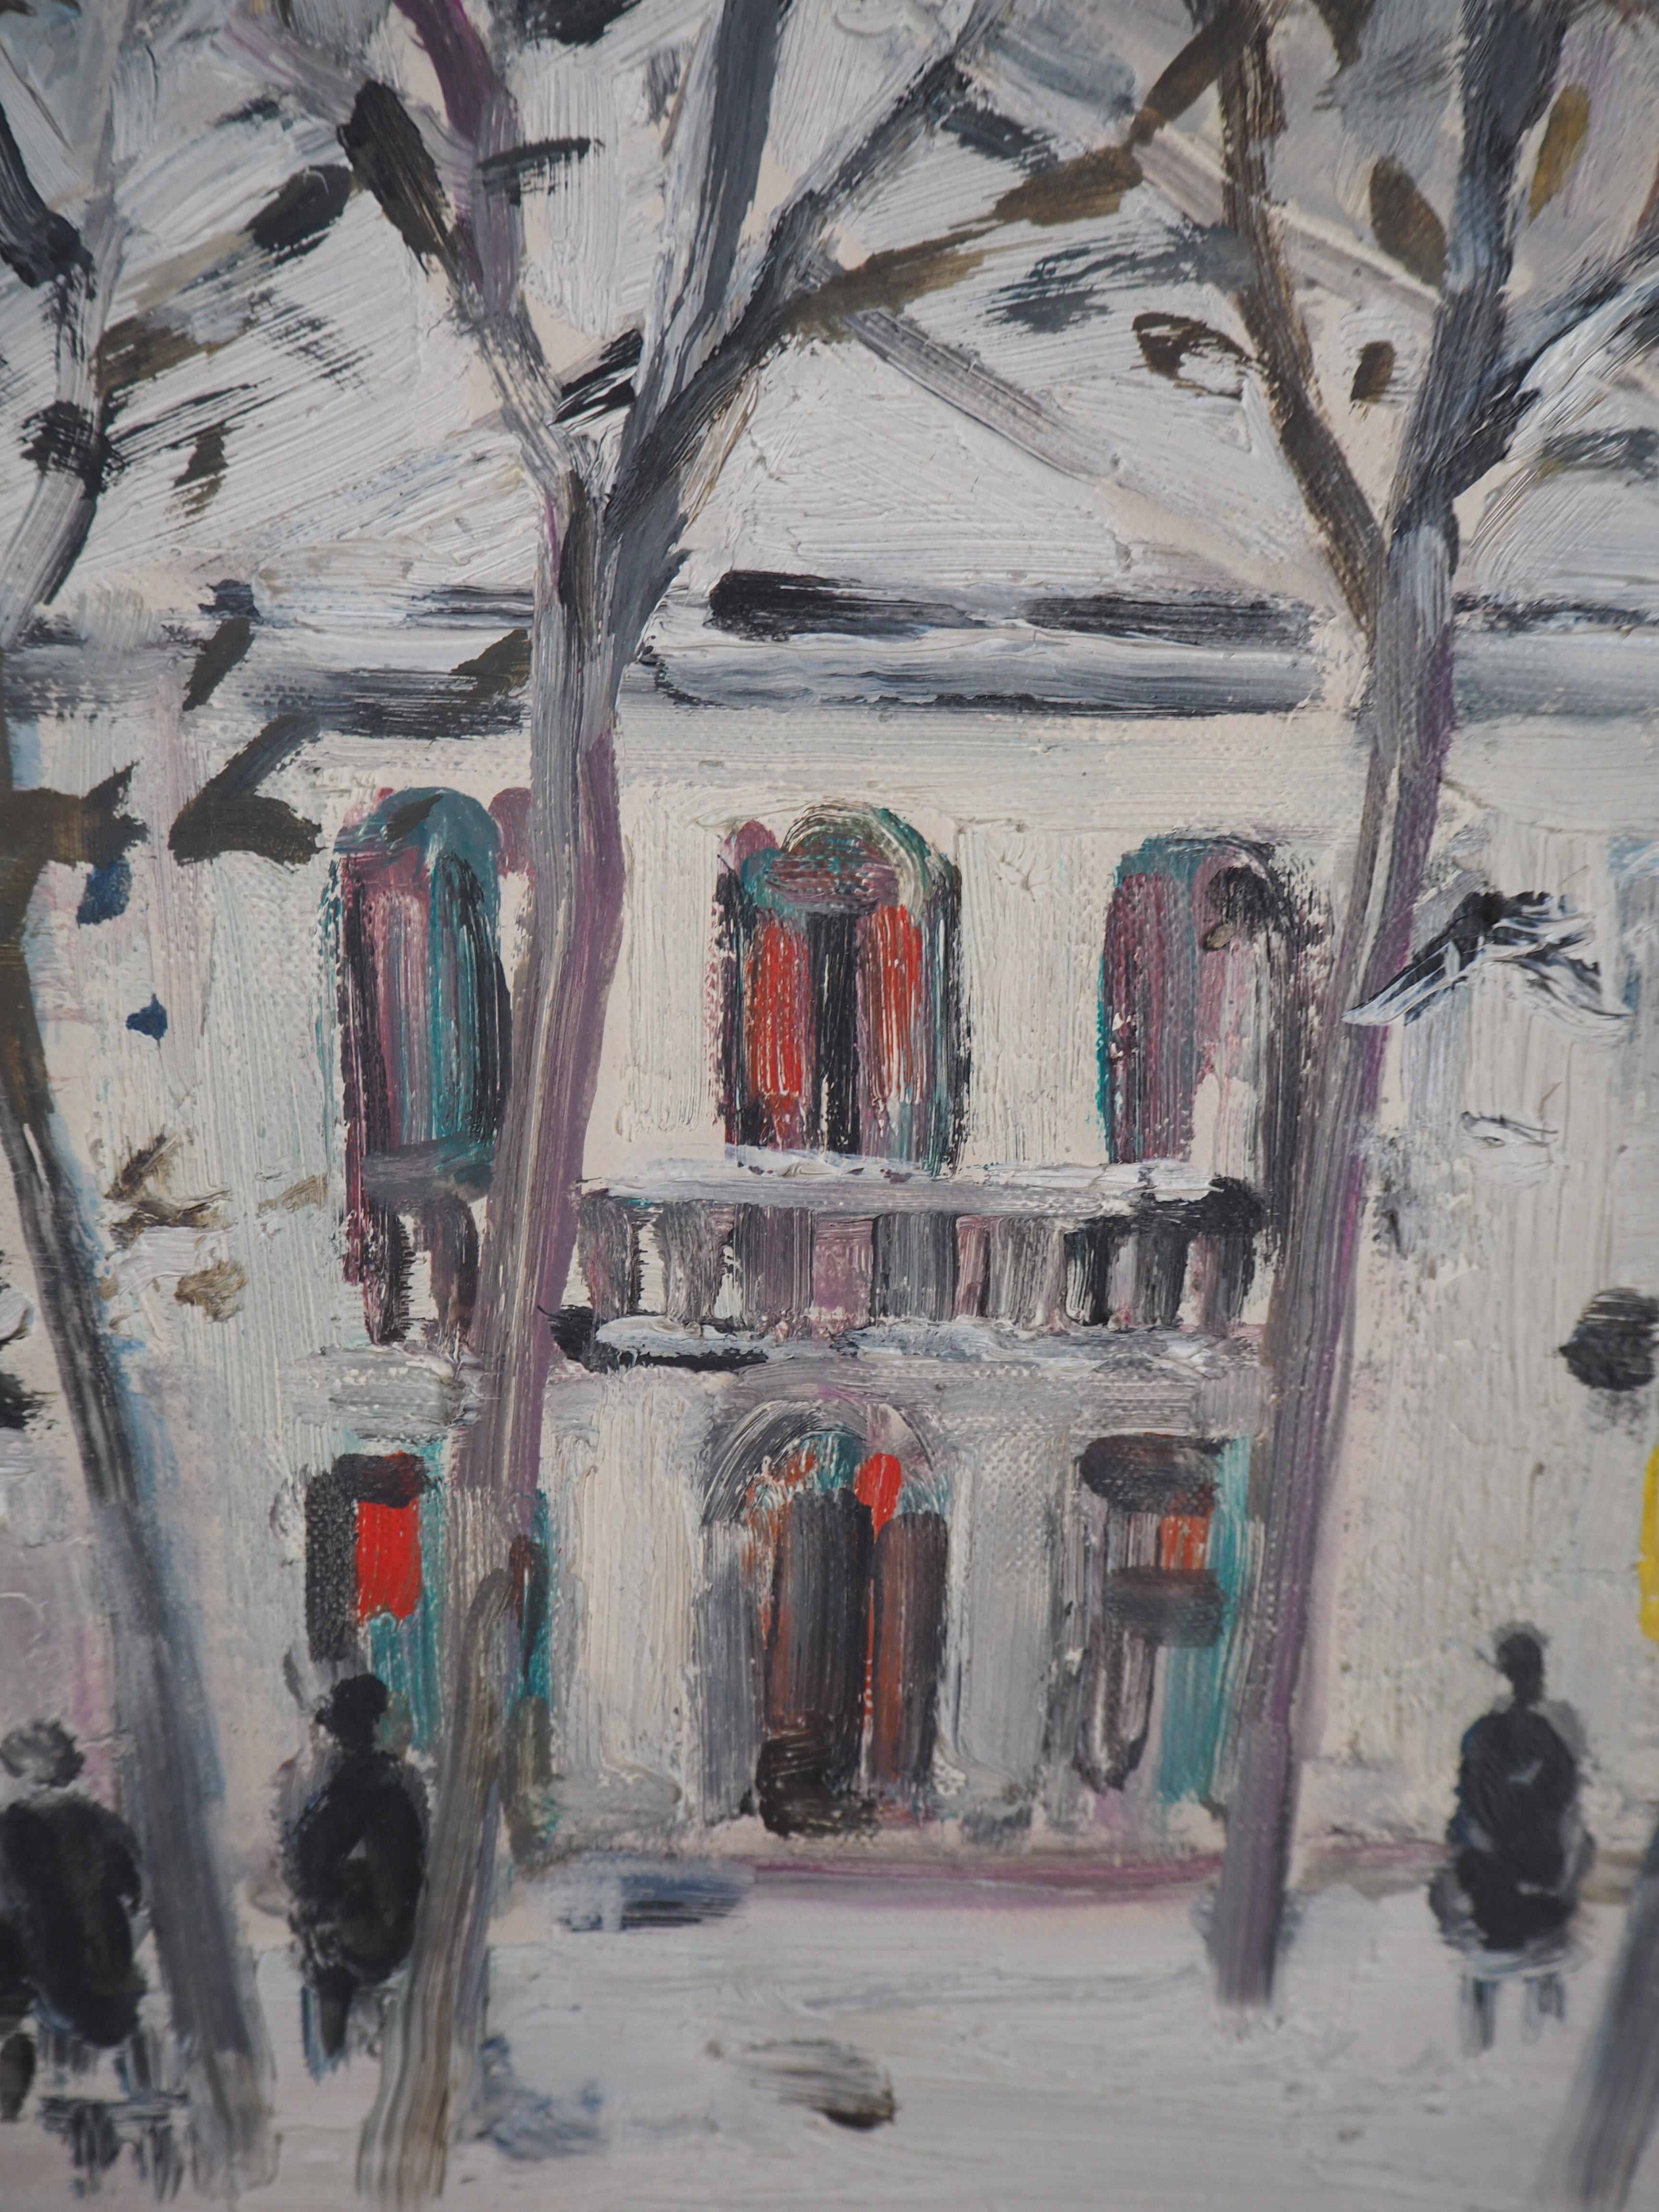 Robert SAVARY
Paris : Snow on Atelier Theater in Montmartre, 1969

Original oil on canvas
Signed bottom left
Signed, titled and dated on the back
On canvas 24 x 33 cm (c. 10 x 12 in)
Presented in a golden wood frame 33 x 46 cm (c. 12 x 17